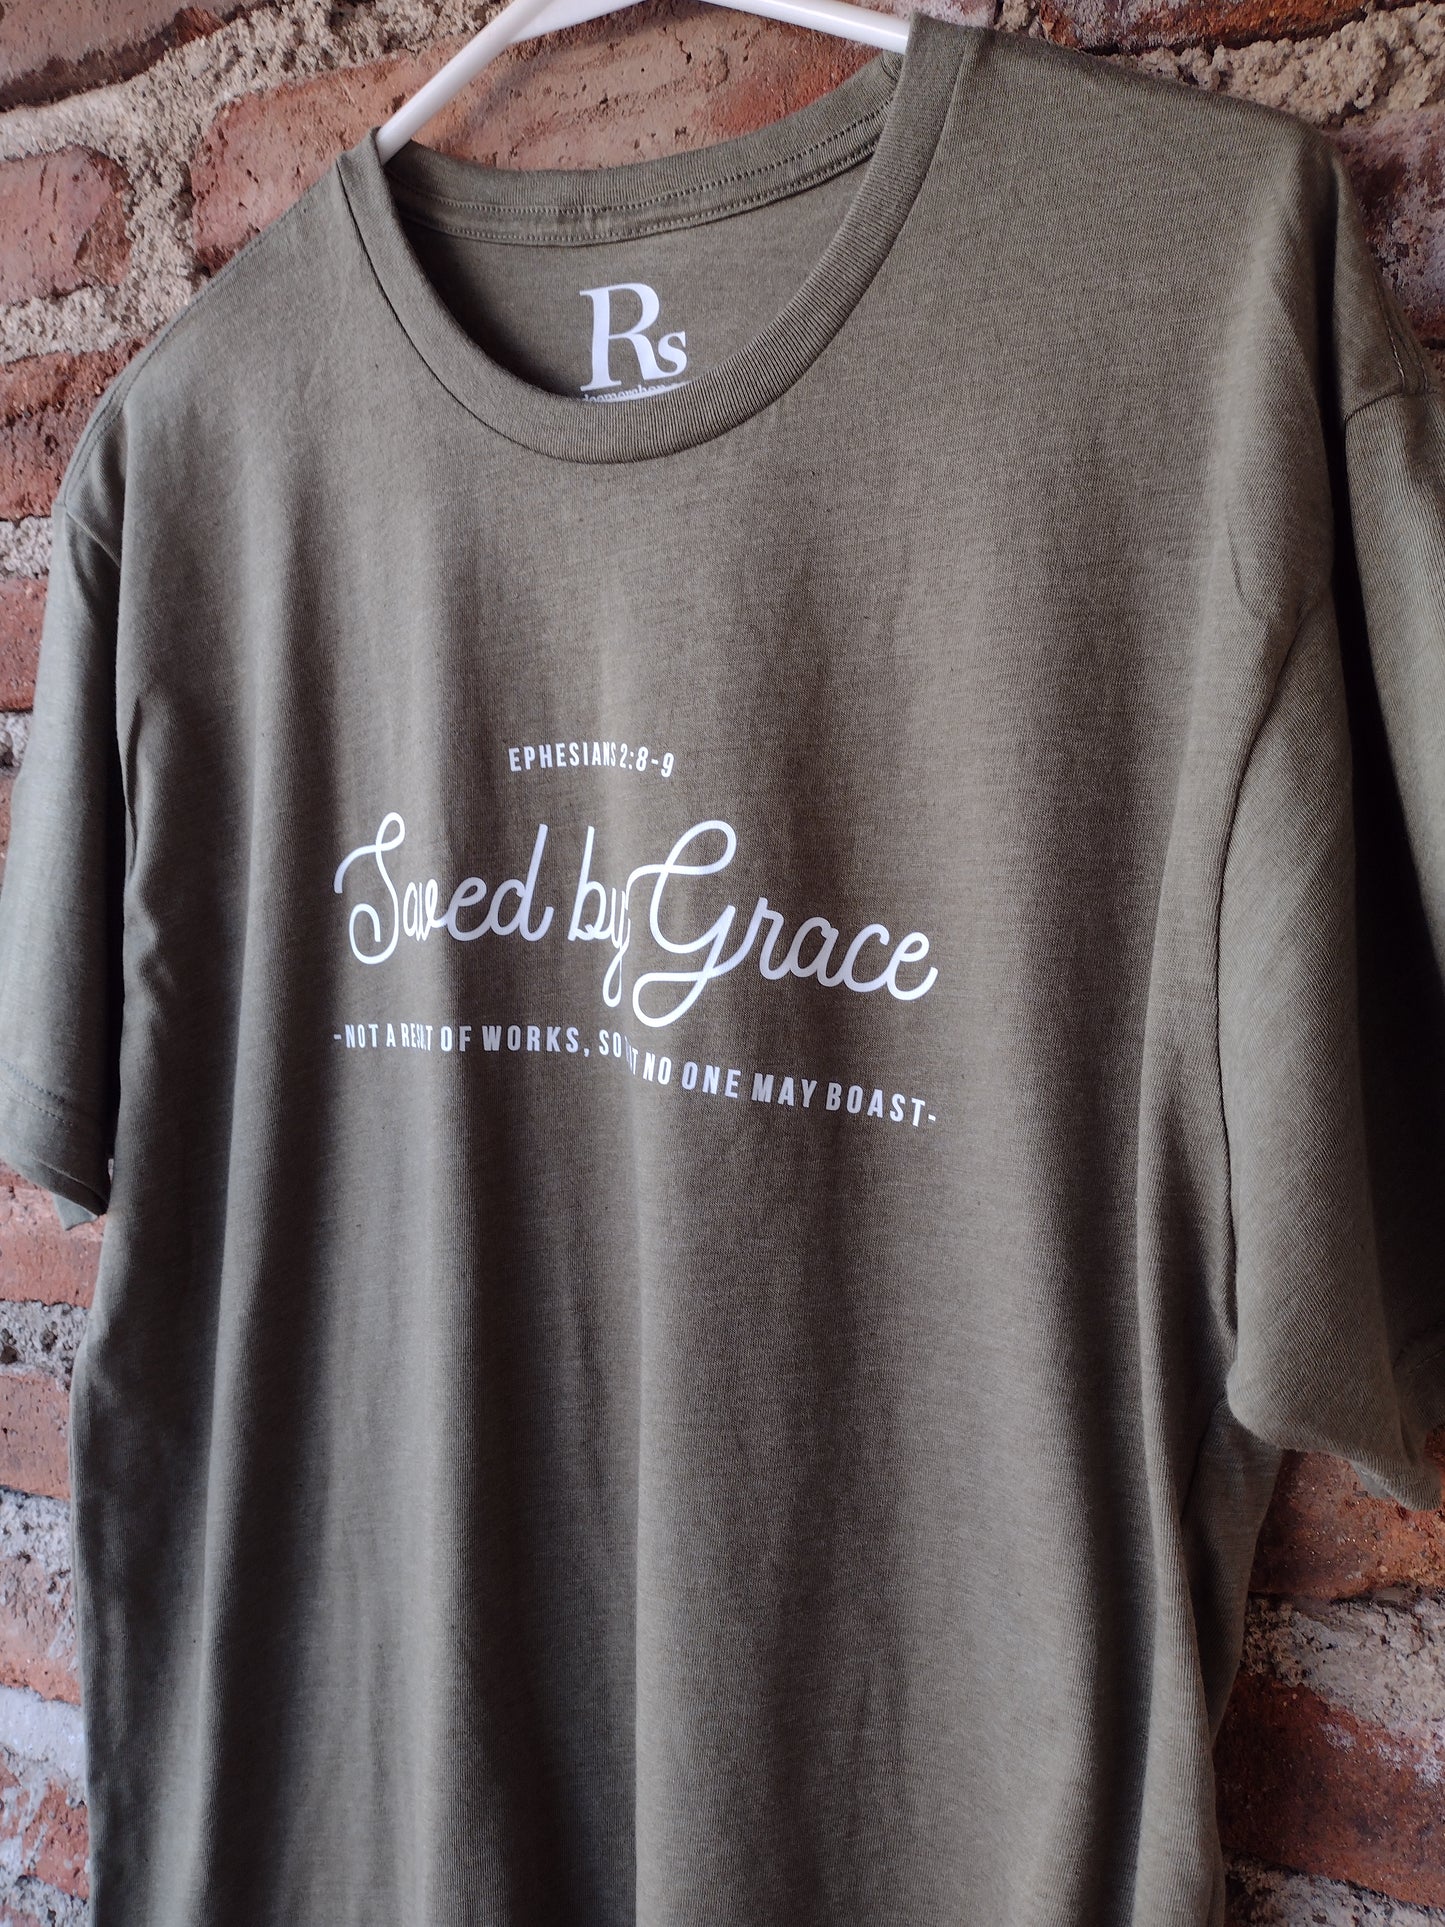 Saved by Grace Military Green | Rs T-shirt